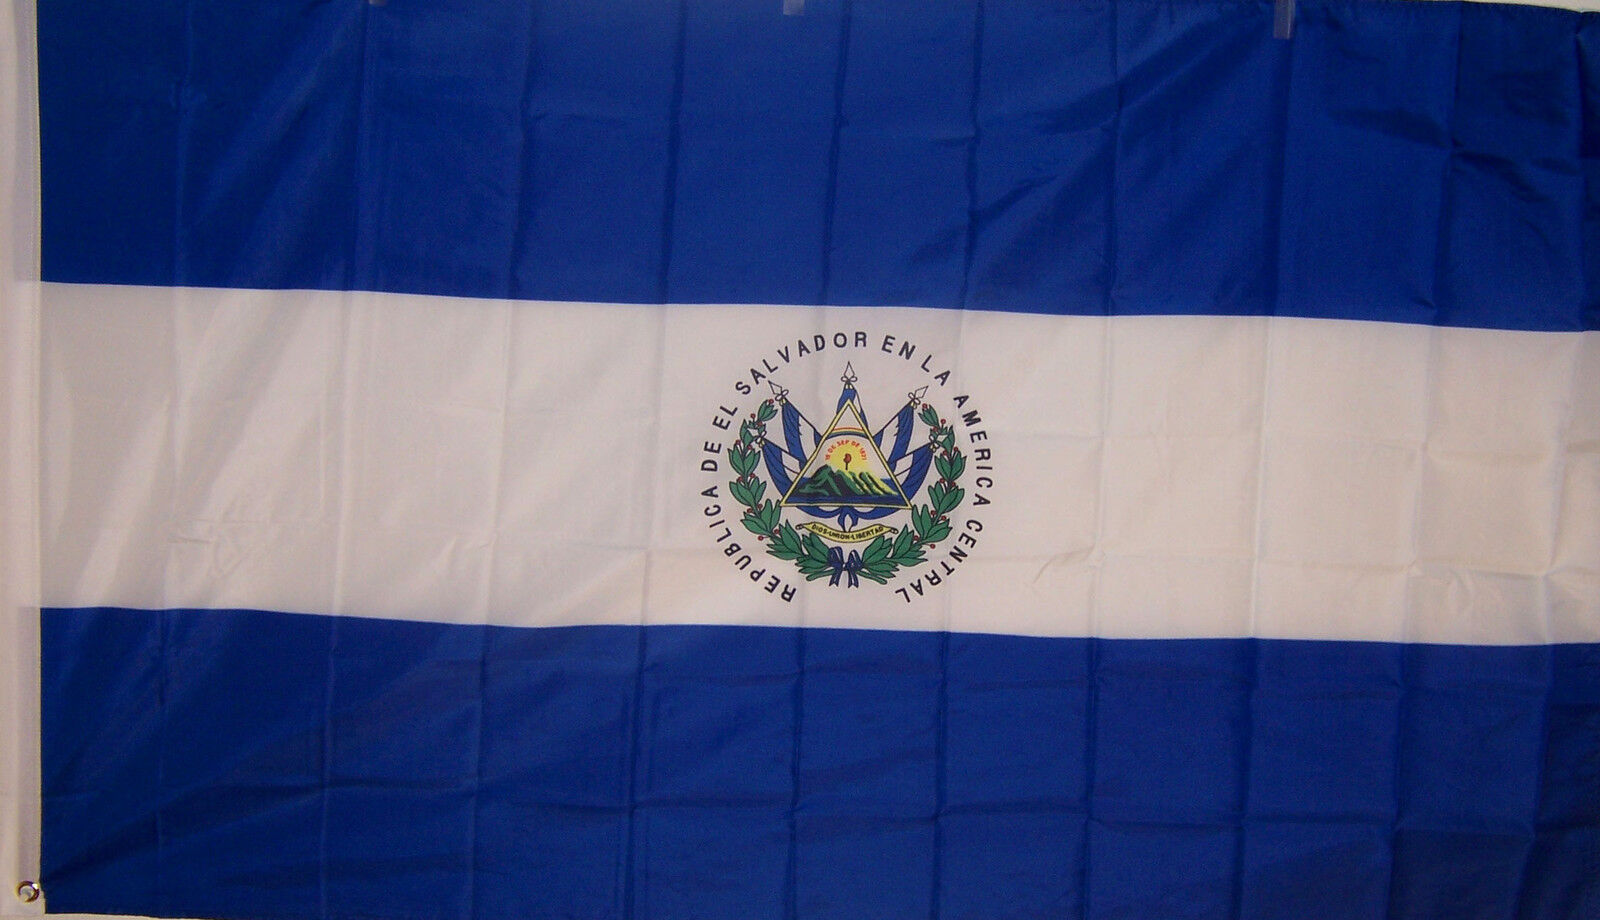 NEW BIG 2X3ft EL SALVADOR COUNTRY BANNER FLAG better quality USA seller 